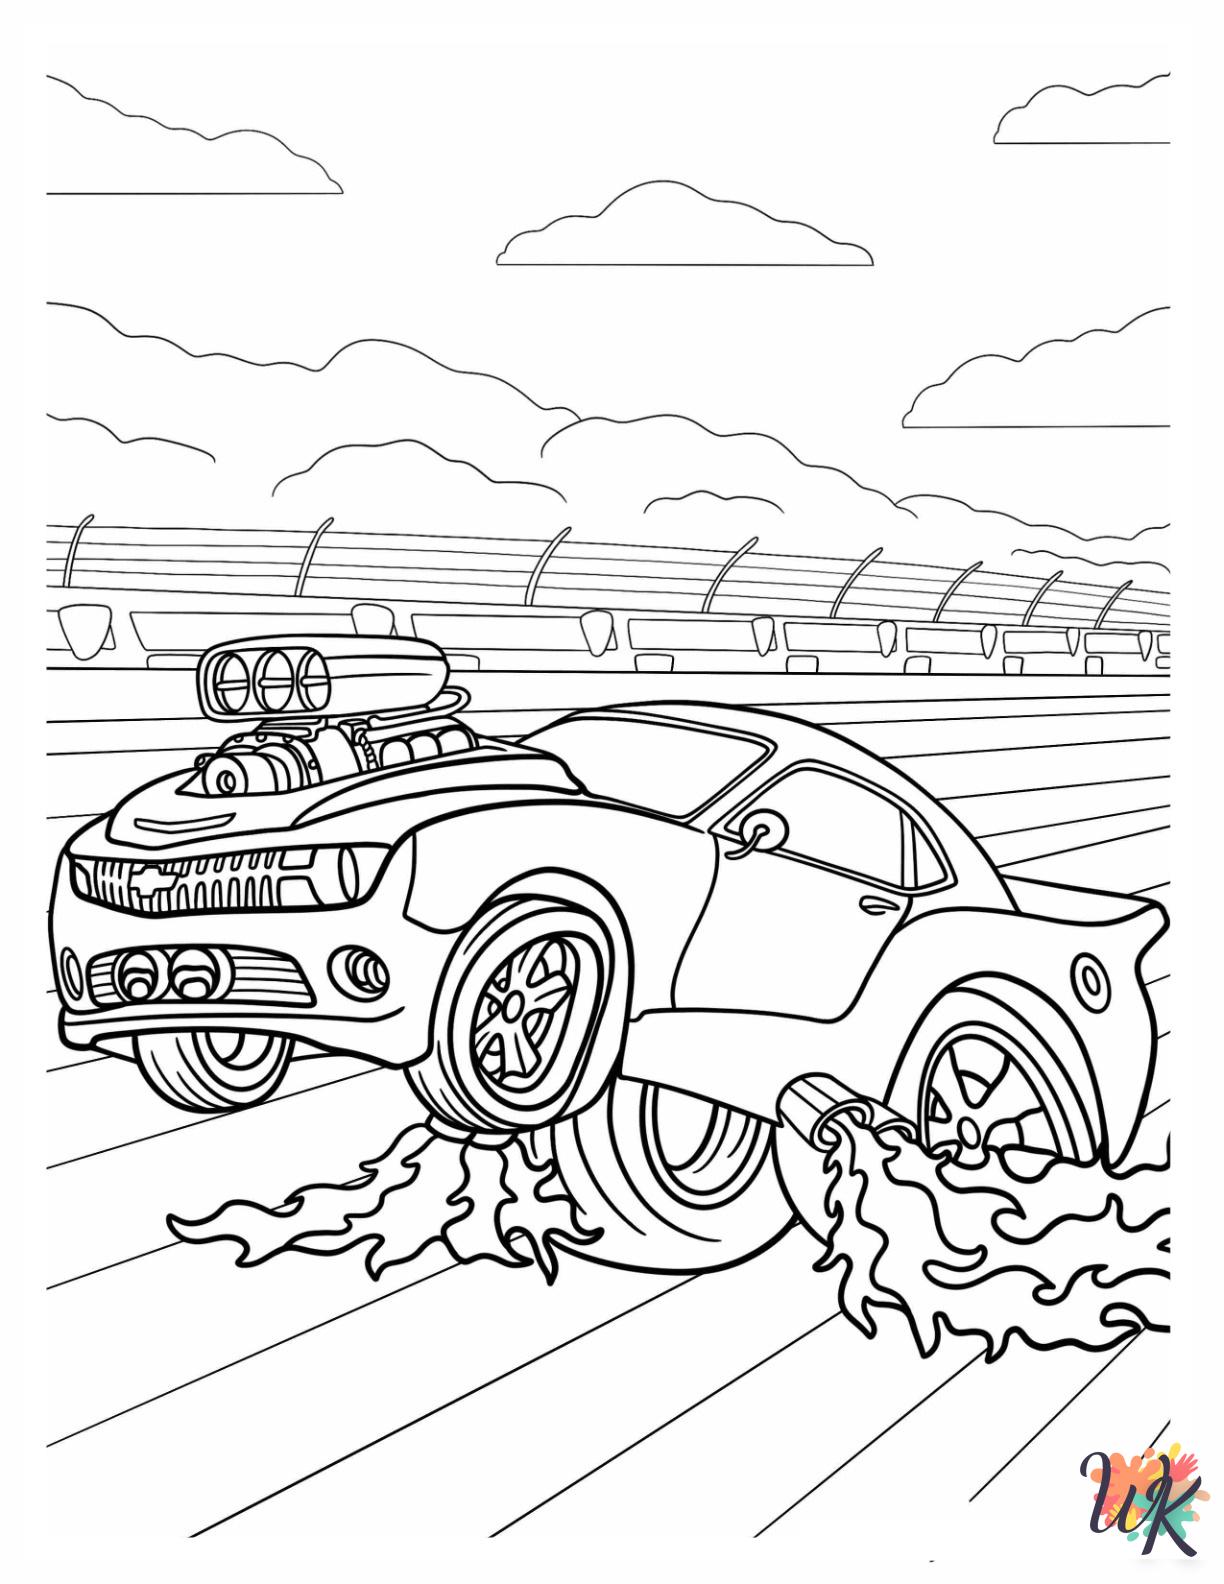 Hot Wheels themed coloring pages